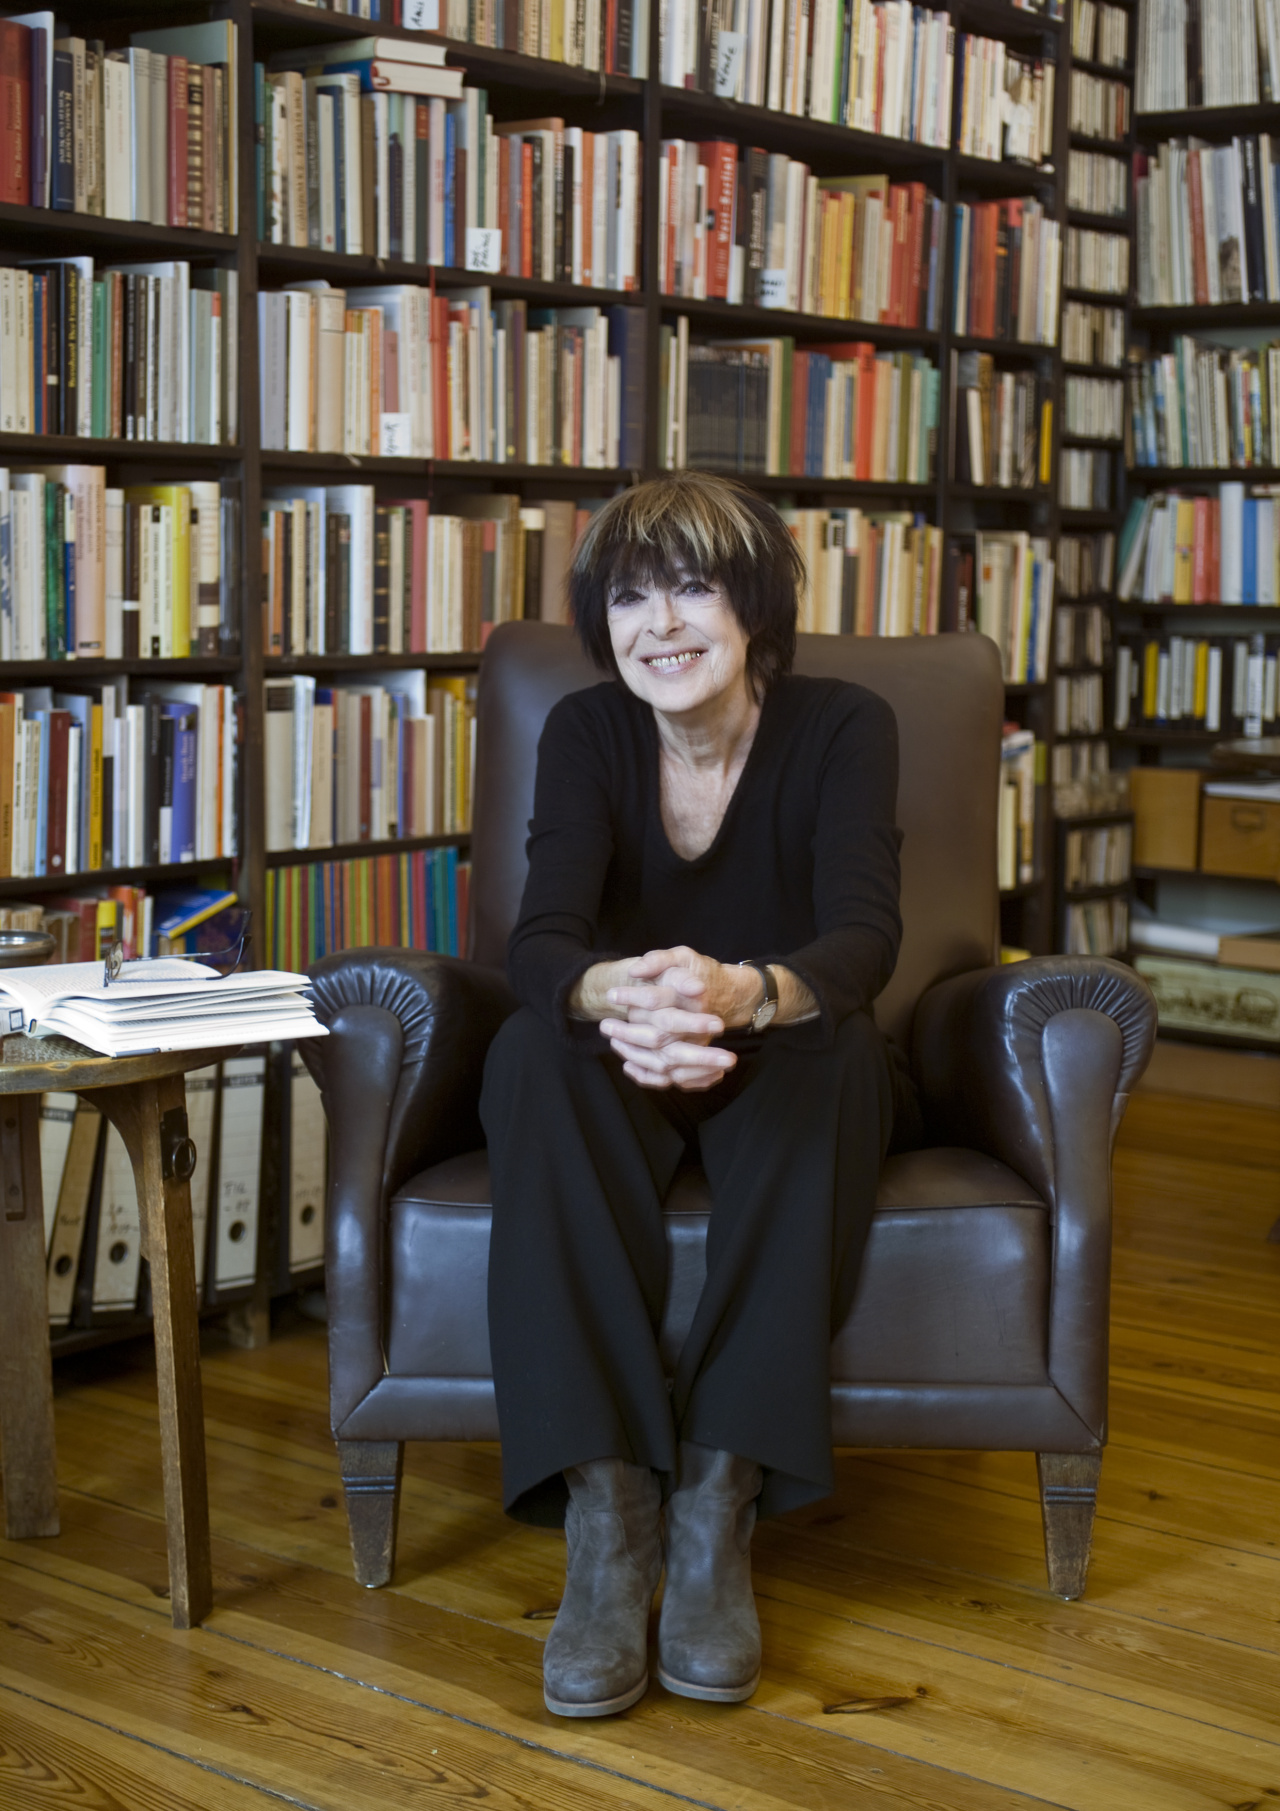 A woman is sitting in a chair in front of a large bookshelf.